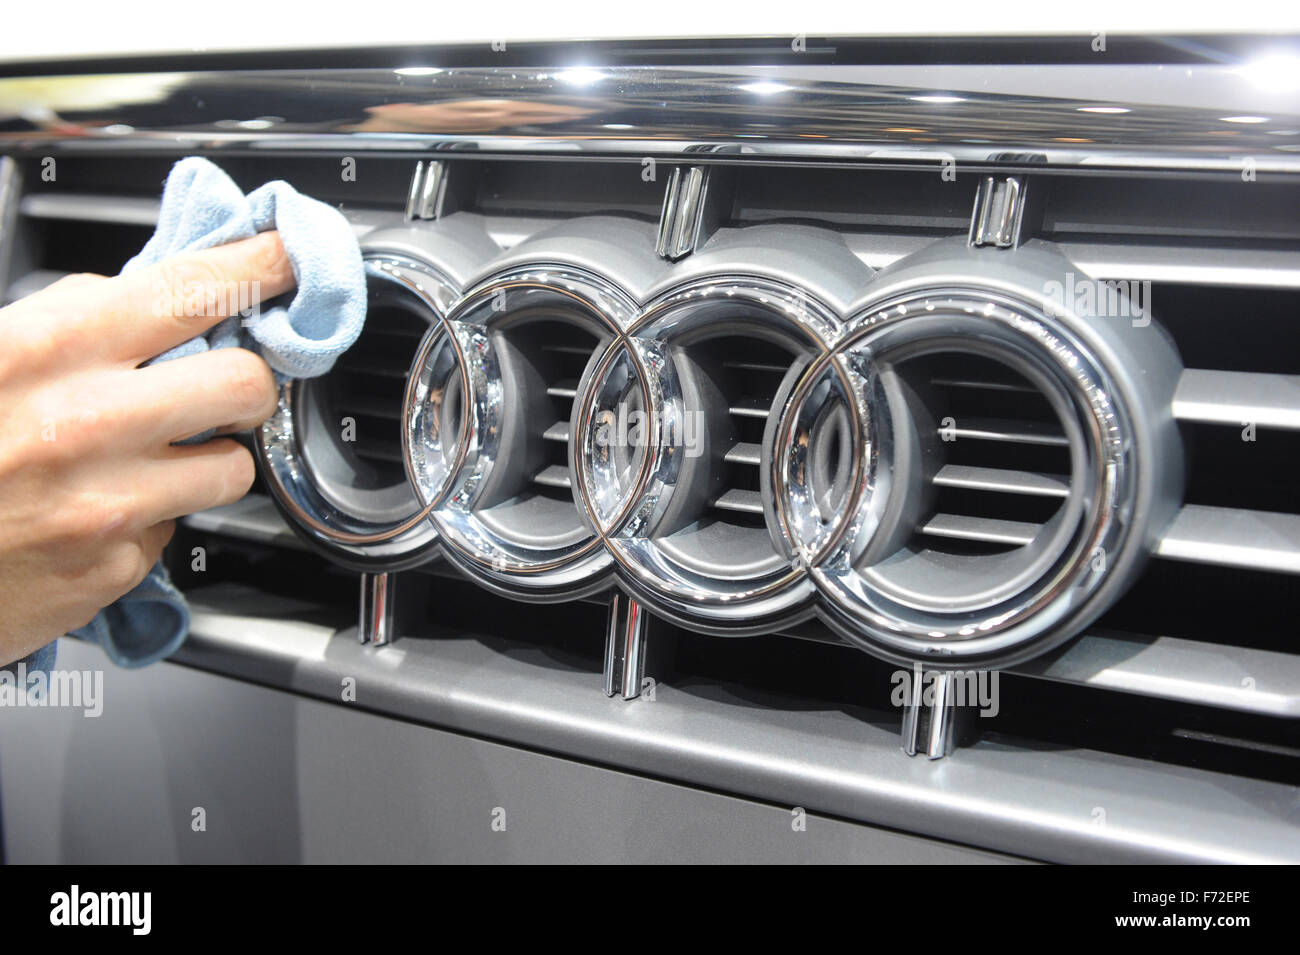 Paris, France. 02nd Oct, 2008. A person wipes off the front of an Audi S4 ahead of the Paris Motor Show in Paris, France, 02 October 2008. The biennial auto show presents the latest trends from 04 to 19 October. Photo: ULI DECK/dpa/Alamy Live News Stock Photo